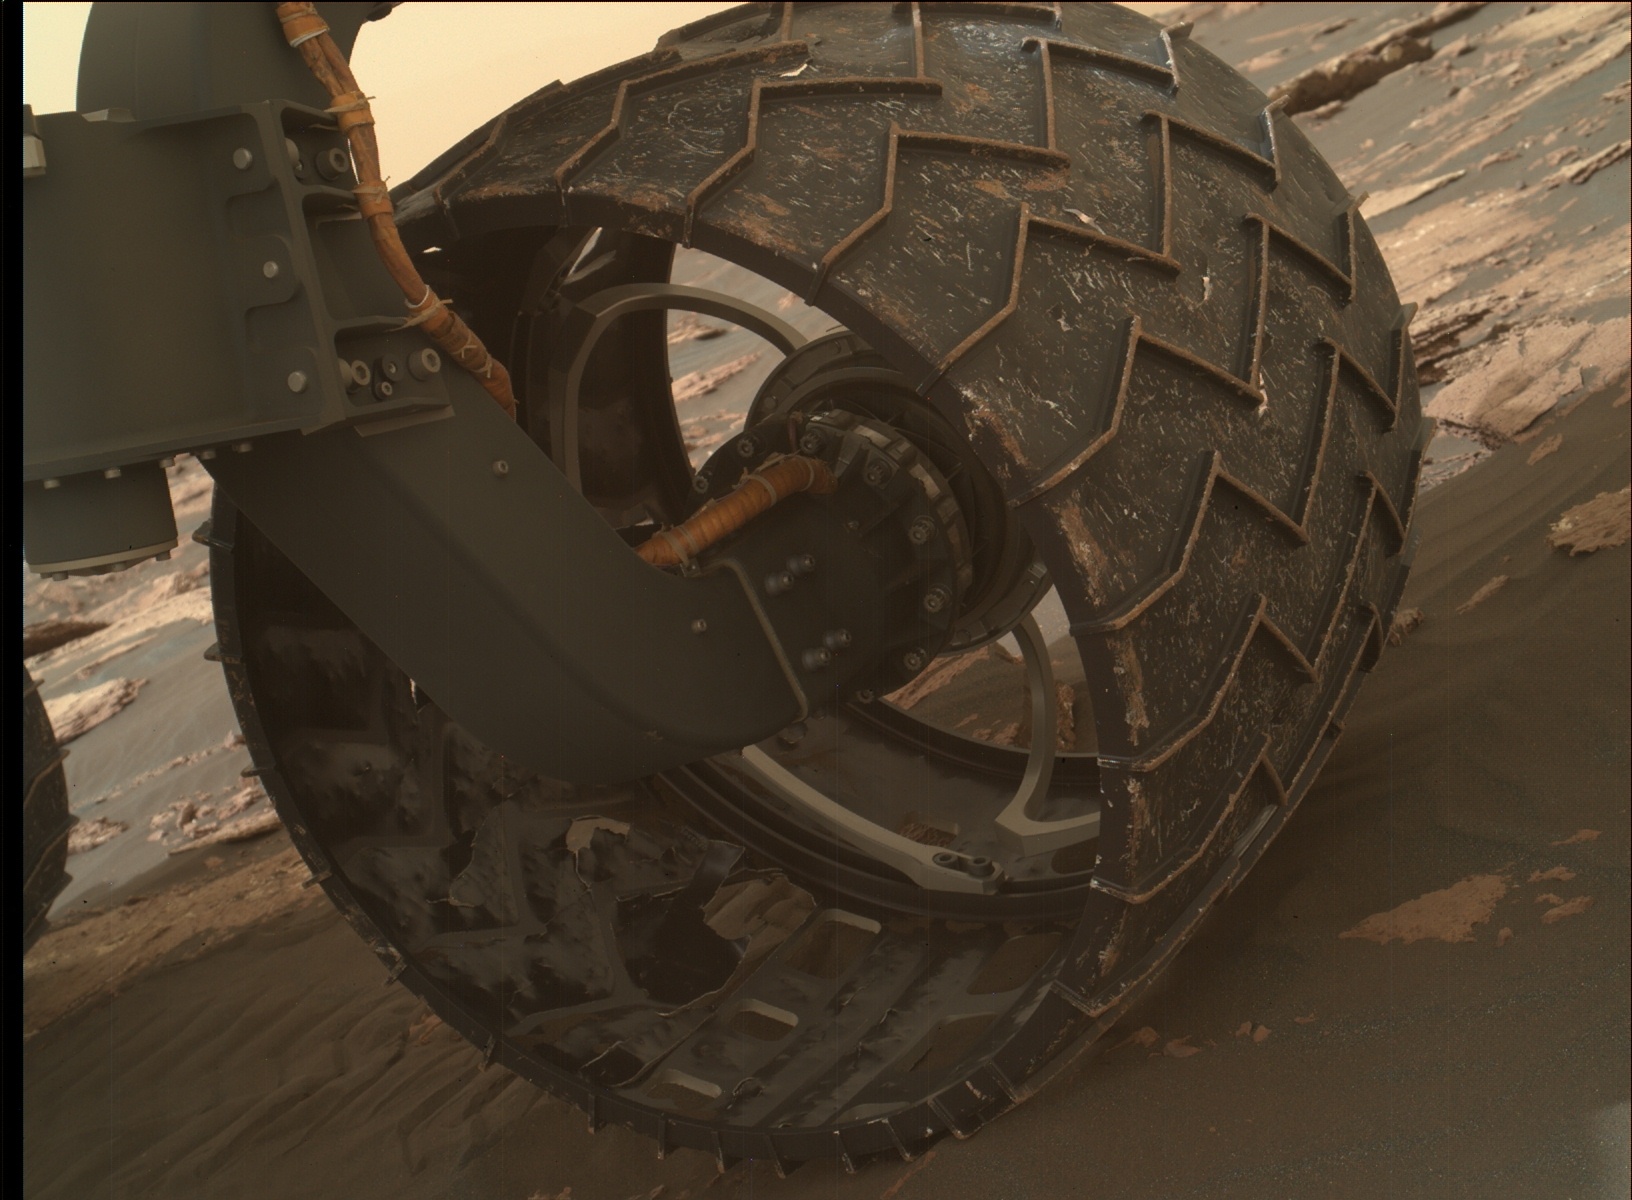 Nasa's Mars rover Curiosity acquired this image using its Mars Hand Lens Imager (MAHLI) on Sol 1641